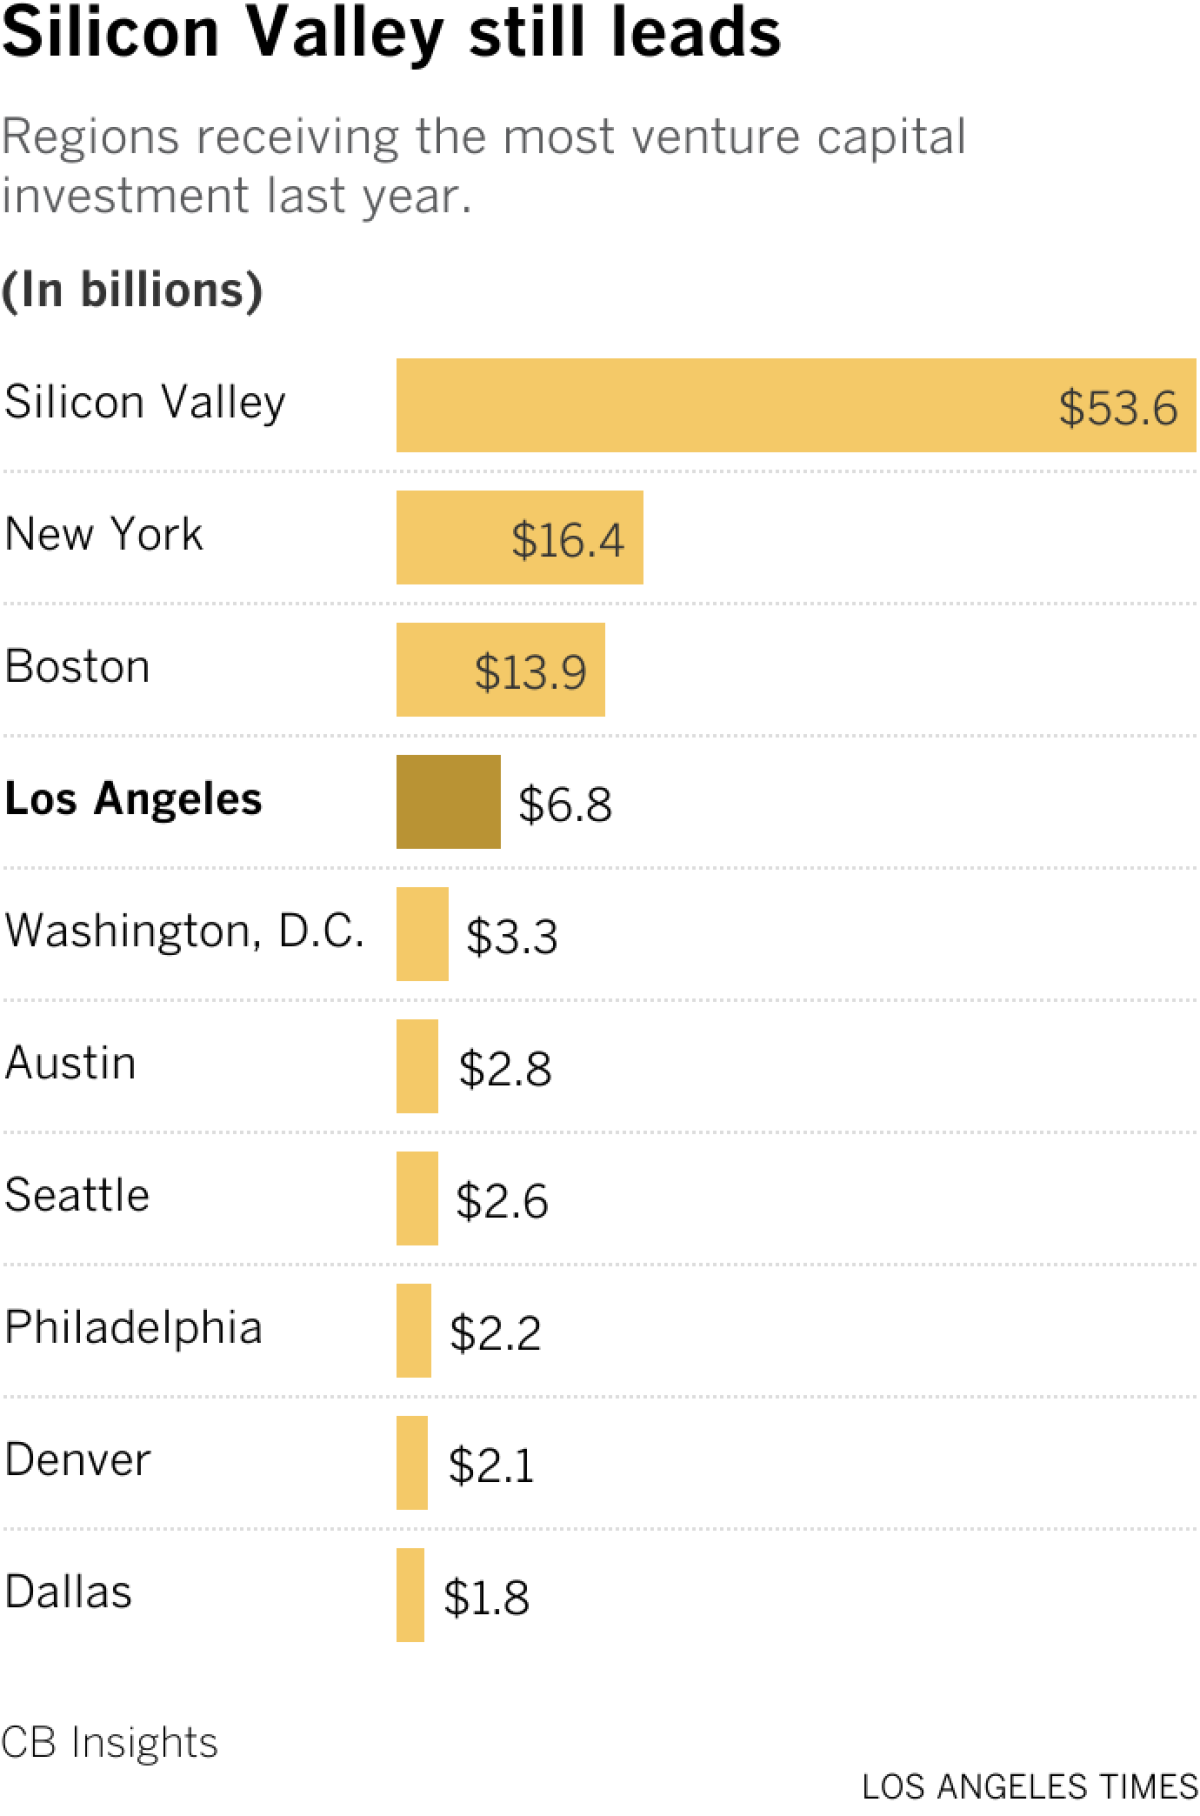 Regions receiving the most venture capital investment last year.